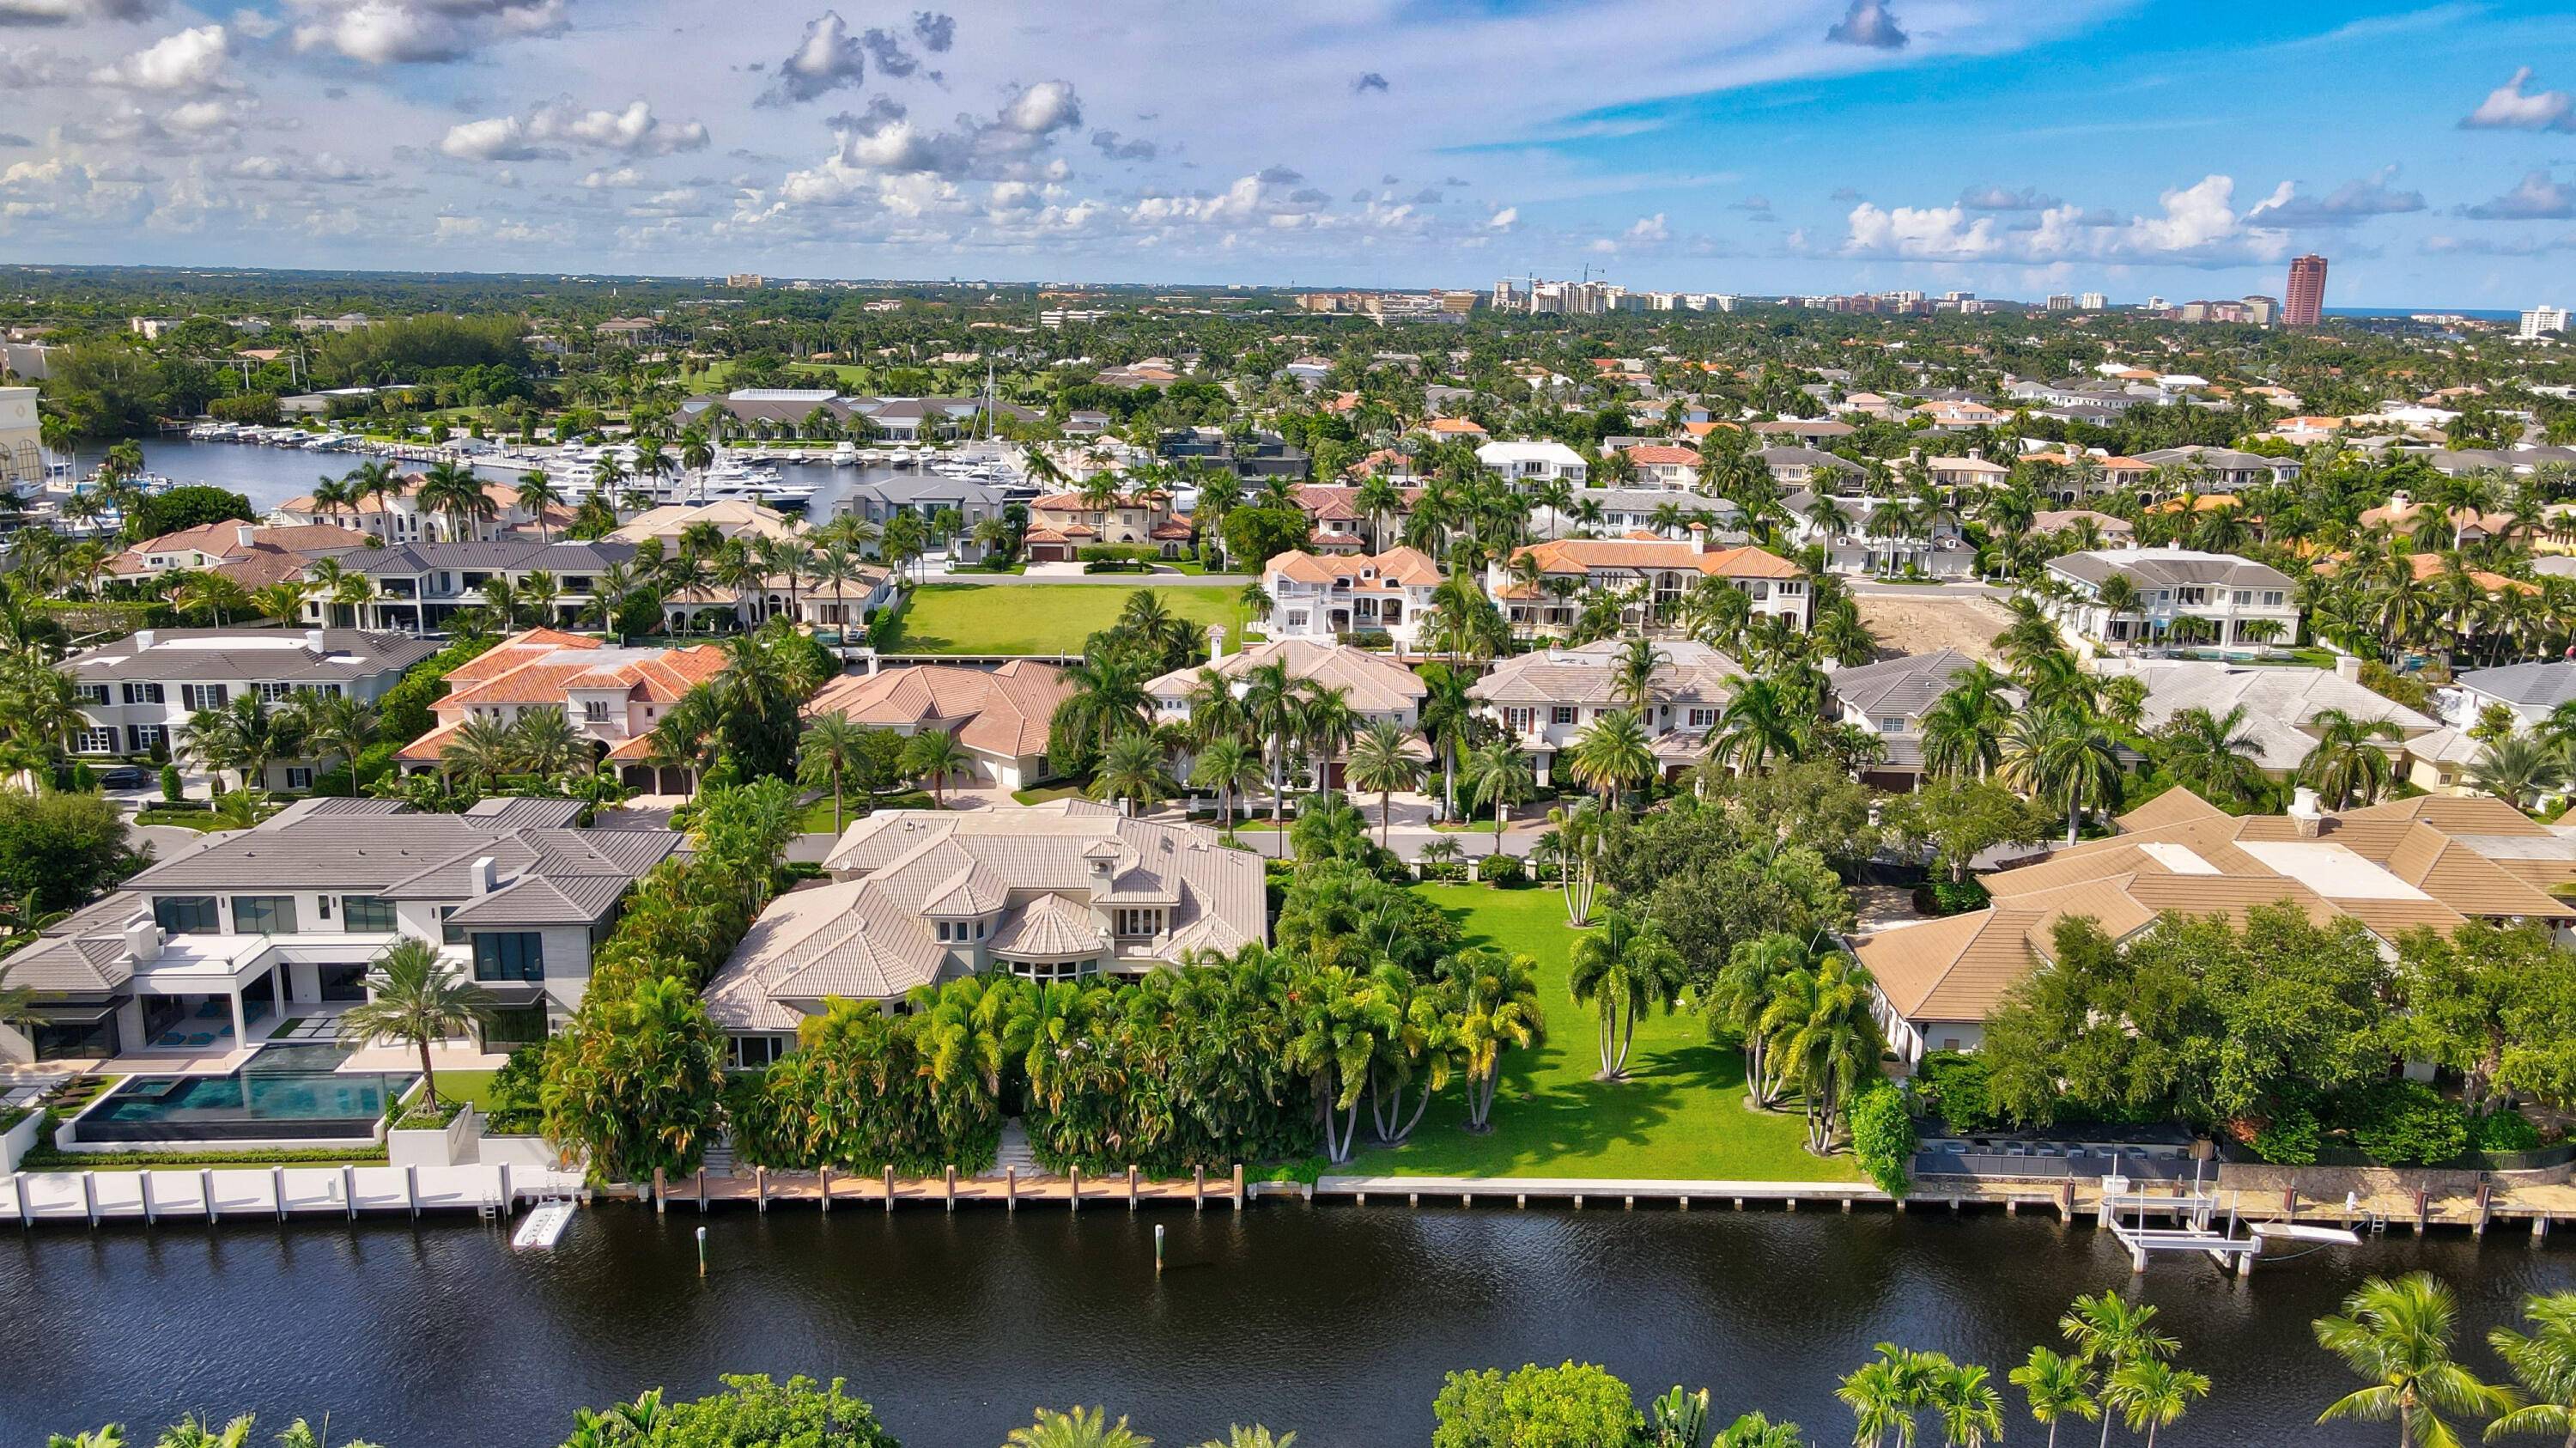 Introducing 174 West Coconut Palm Road ; an exquisite double lot estate situated in one of Boca Raton's most prestigious communities, Royal Palm Yacht Country Club.